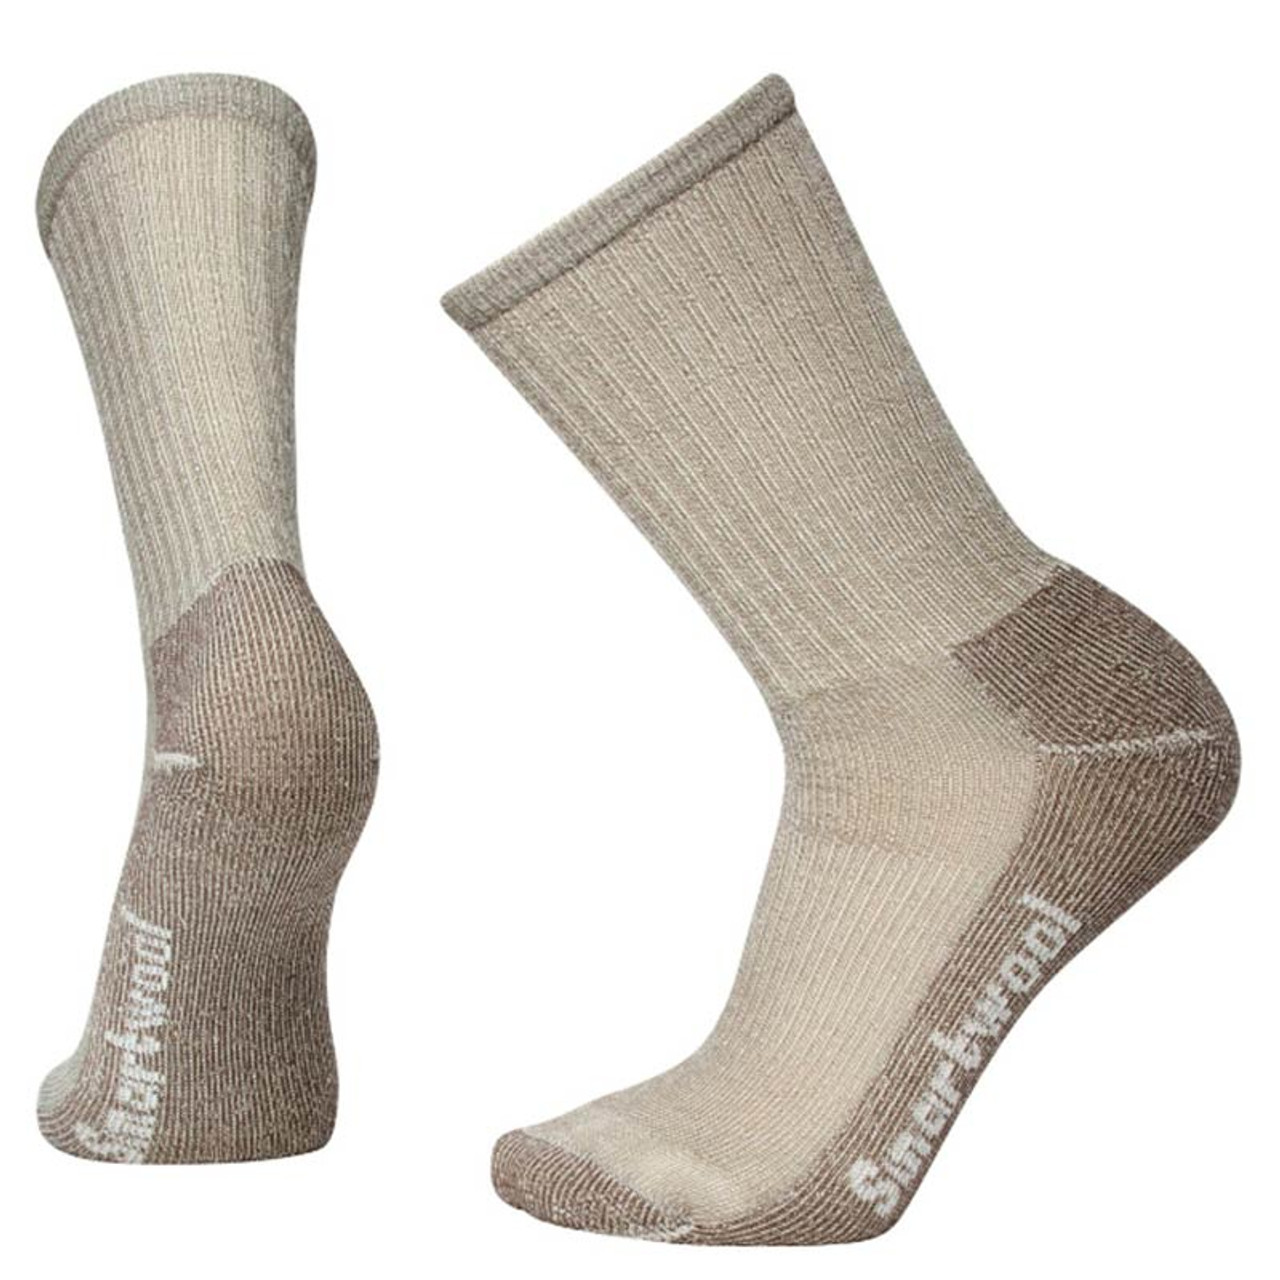 https://cdn11.bigcommerce.com/s-s62r70/images/stencil/1280x1280/products/497/8082/Smartwool-Mens-Hike-Light-Crew-Socks-taupe__25382.1539352493.jpg?c=2